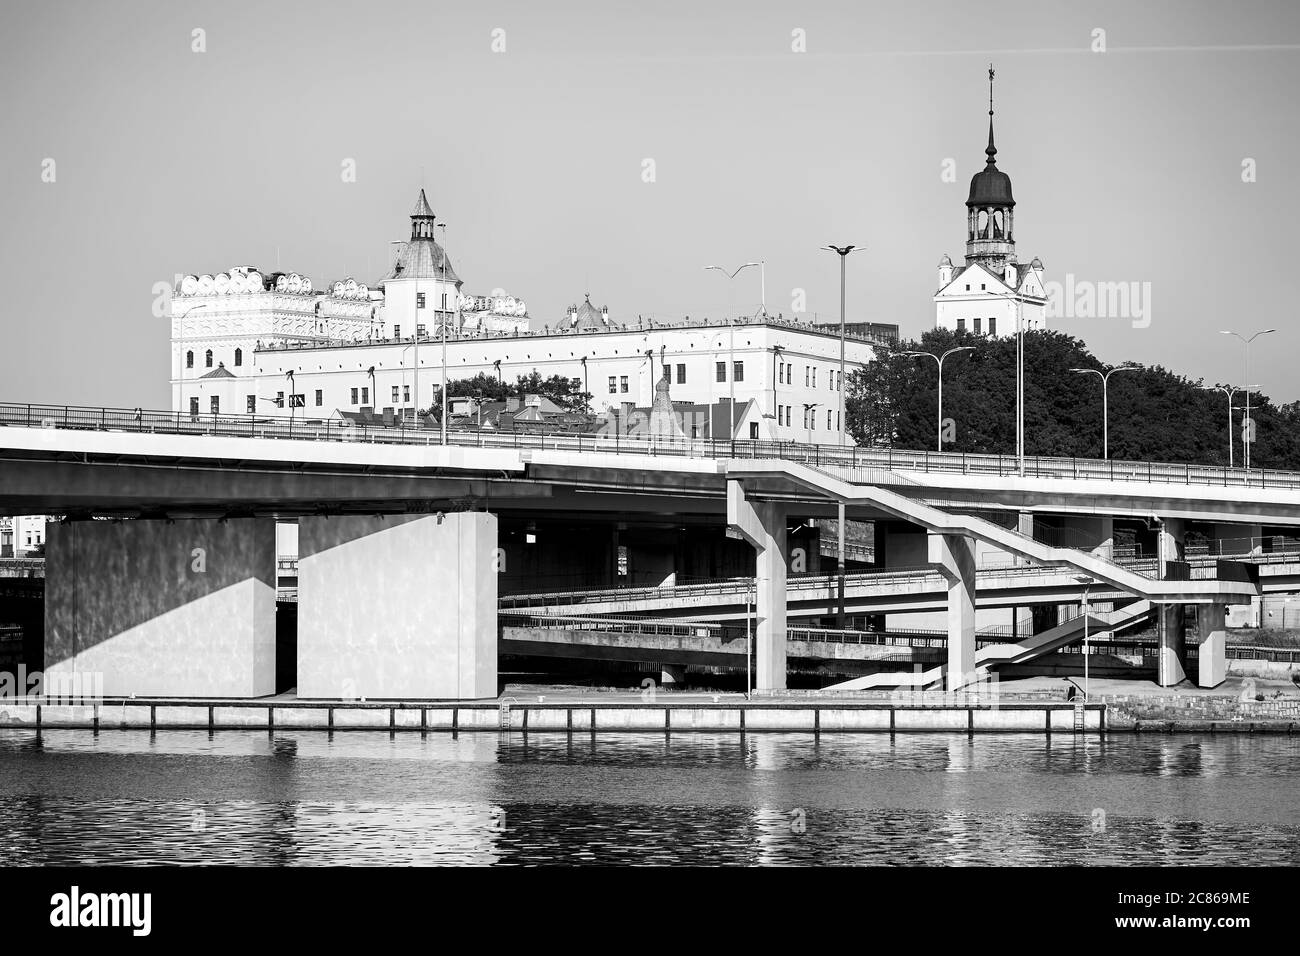 Black and white picture of Szczecin Odra River waterfront with the Pomeranian Dukes Castle, Poland. Stock Photo